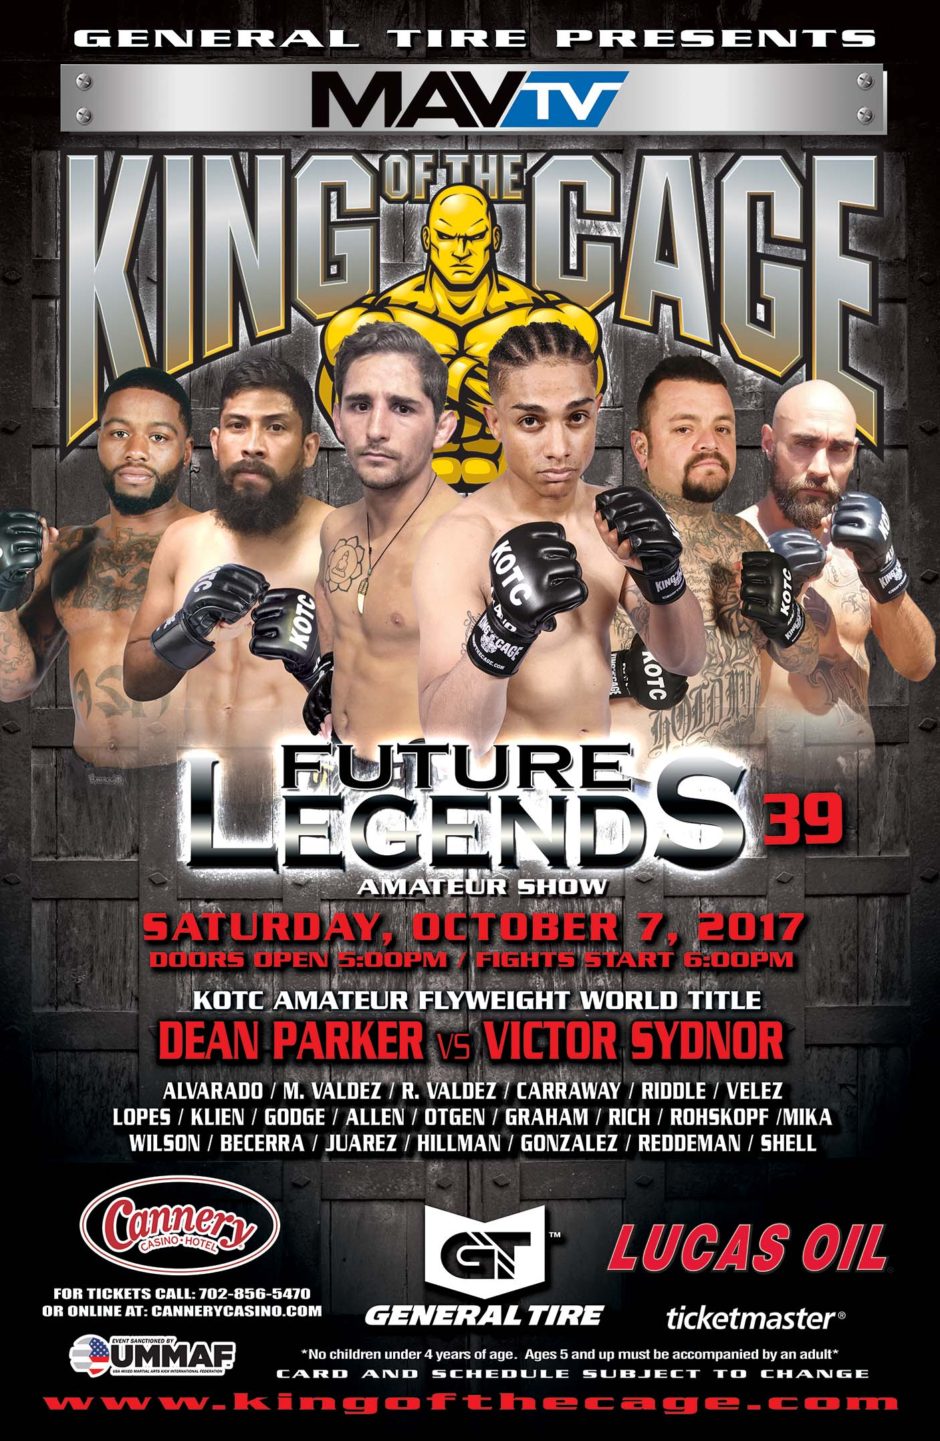 King of the Cage Returns to Cannery Casino Hotel on October 7 for